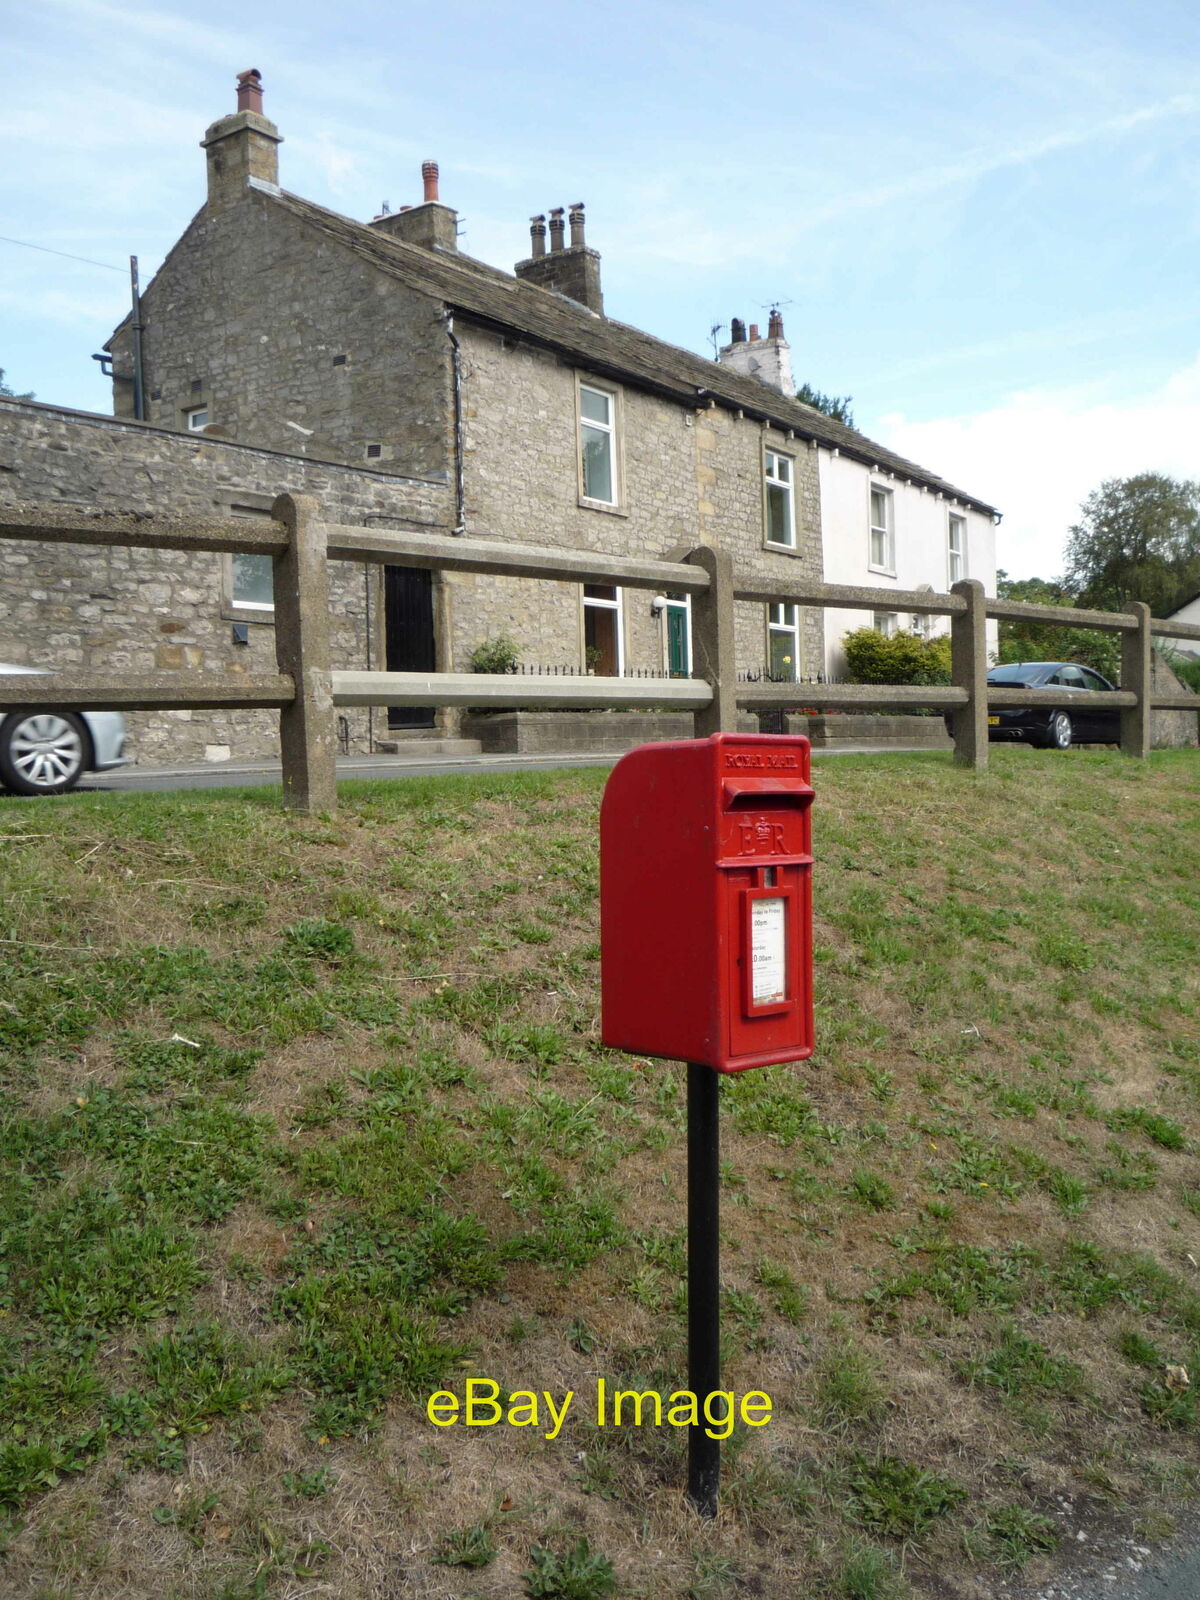 Photo 12x8 Elizabeth II postbox on Old Road, Thornton-in-Craven Earby Post c2018